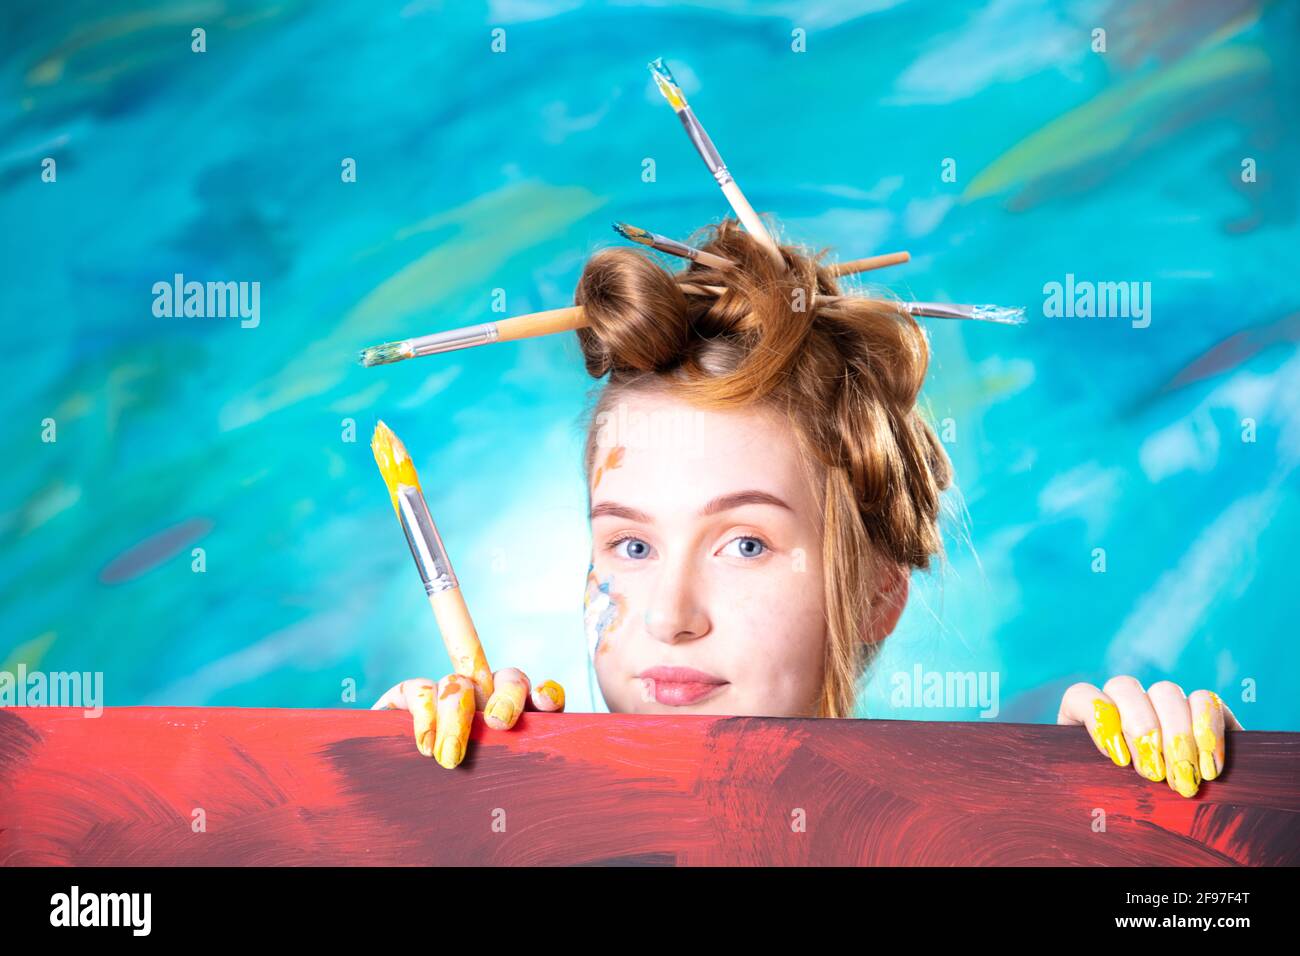 Young woman with updo and brush in her hair while painting. Stock Photo